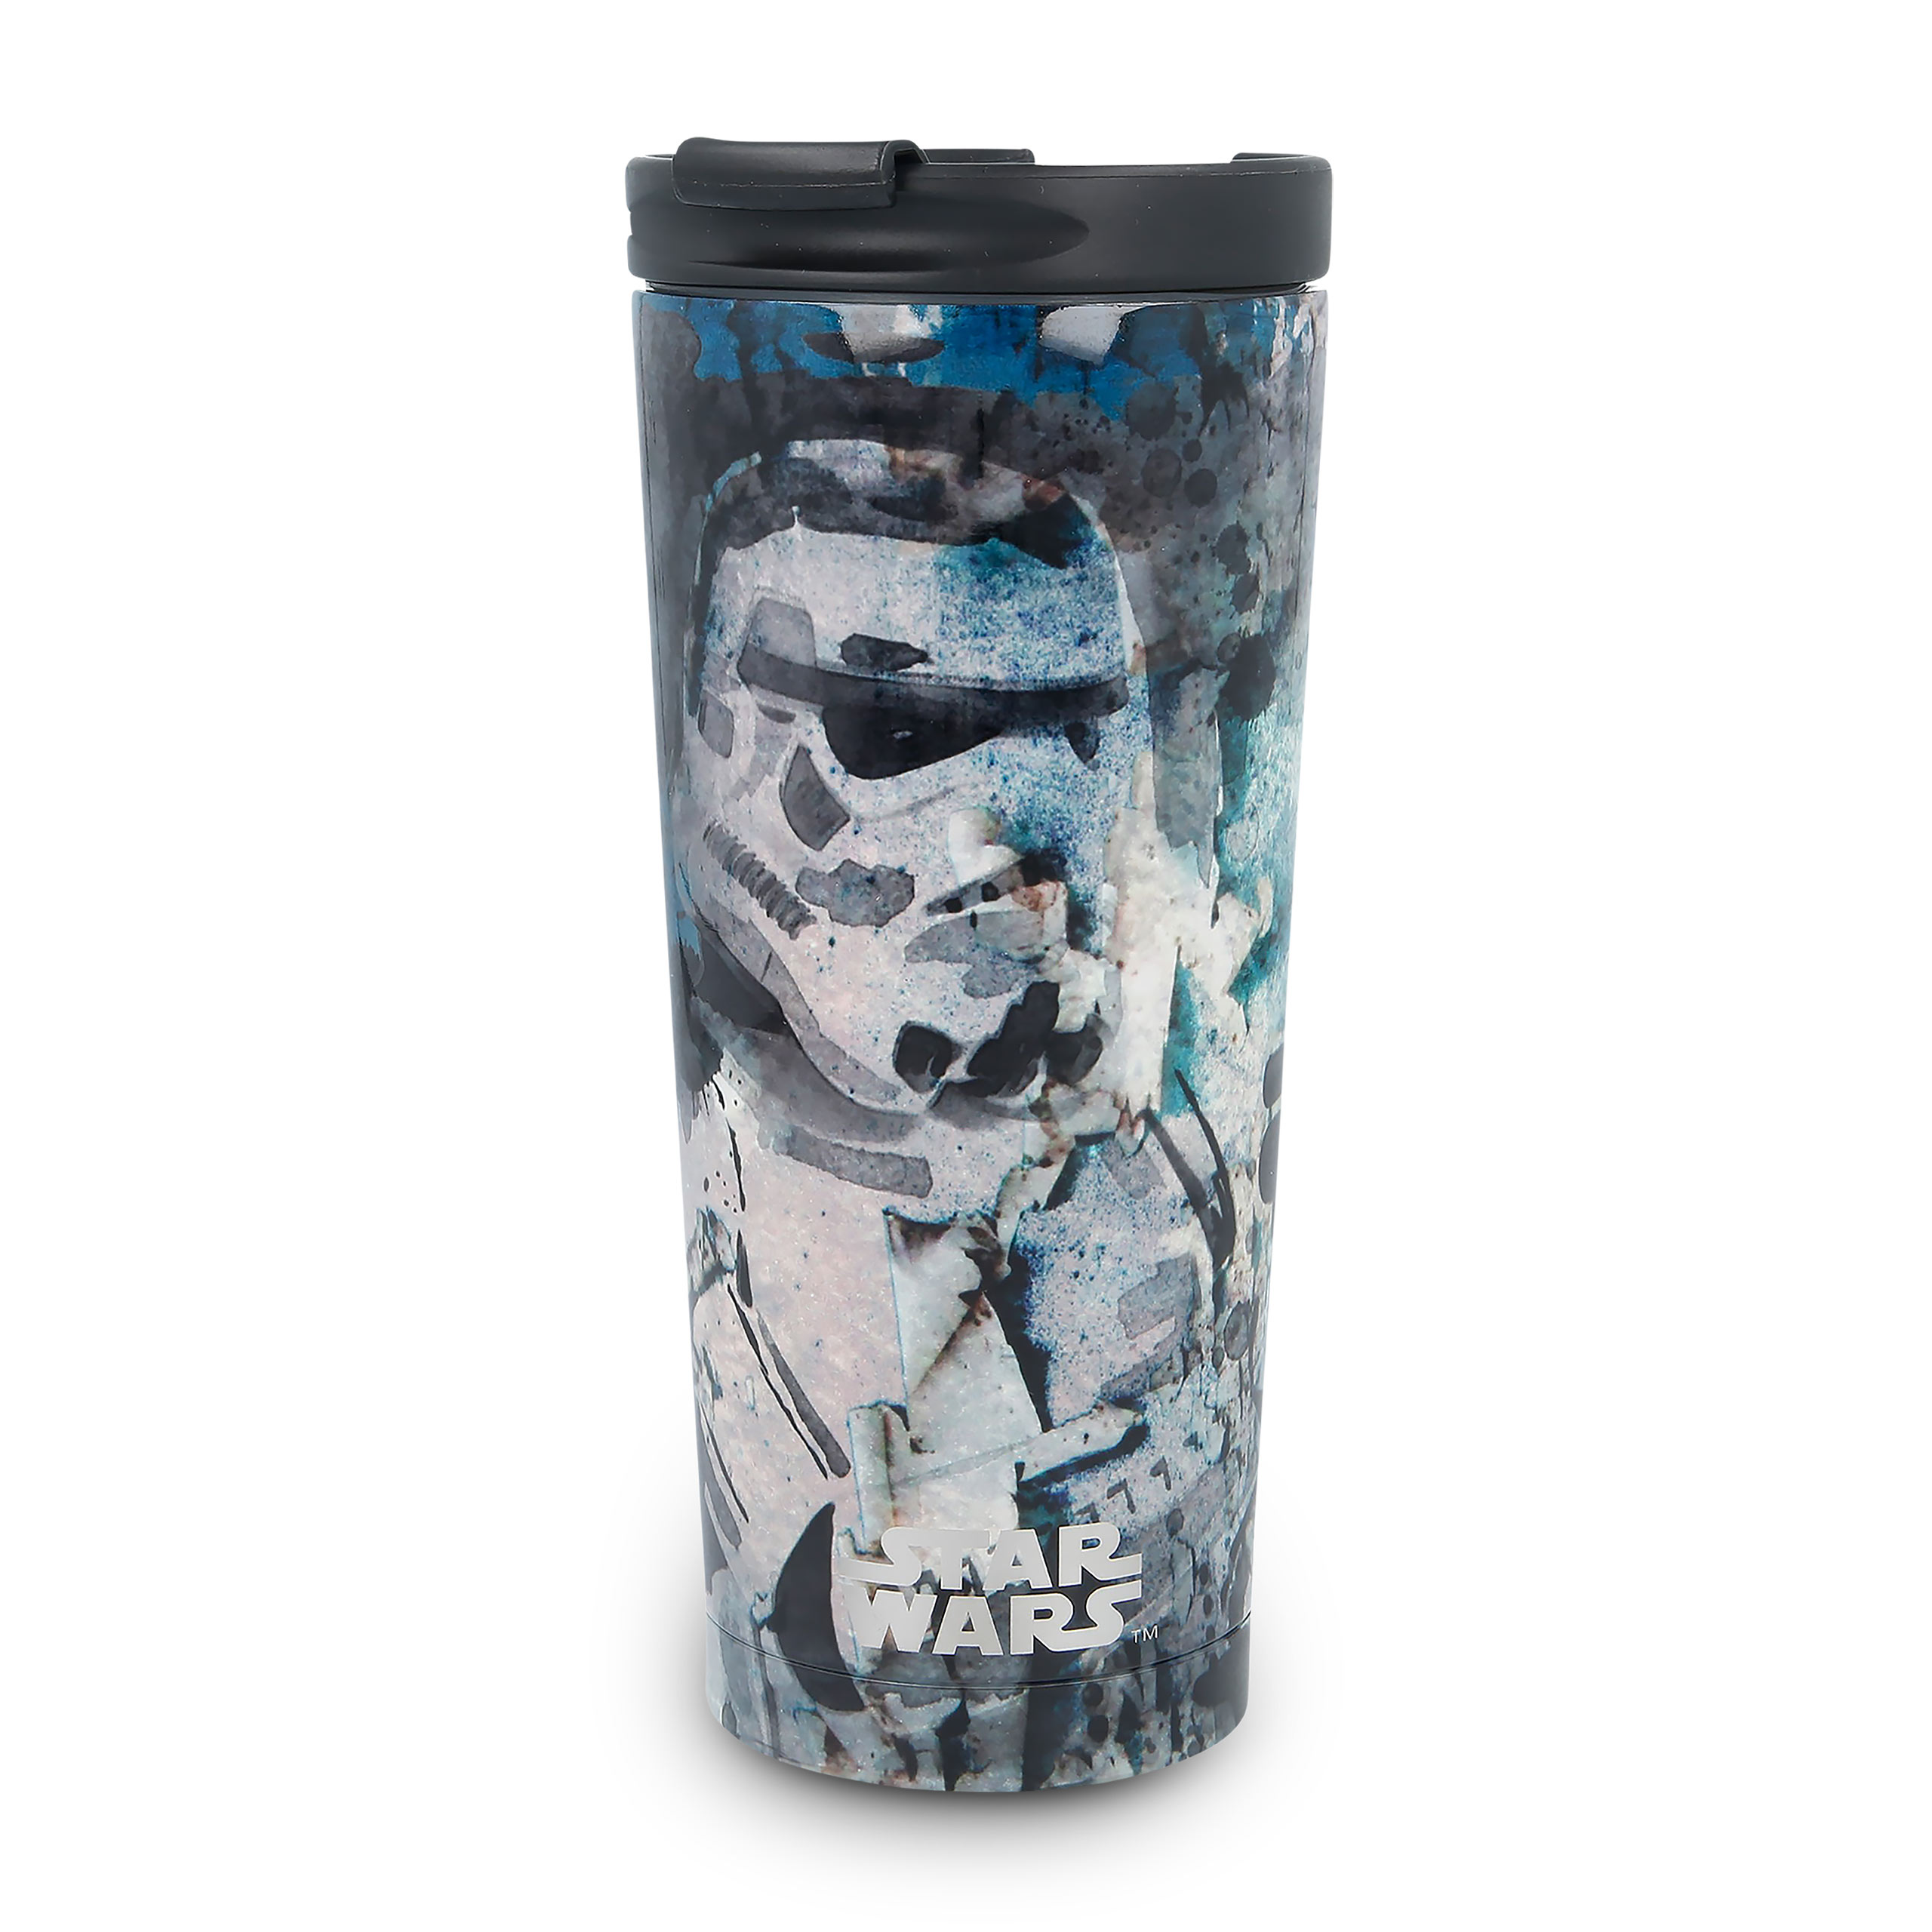 Stormtrooper To Go Cup - Star Wars